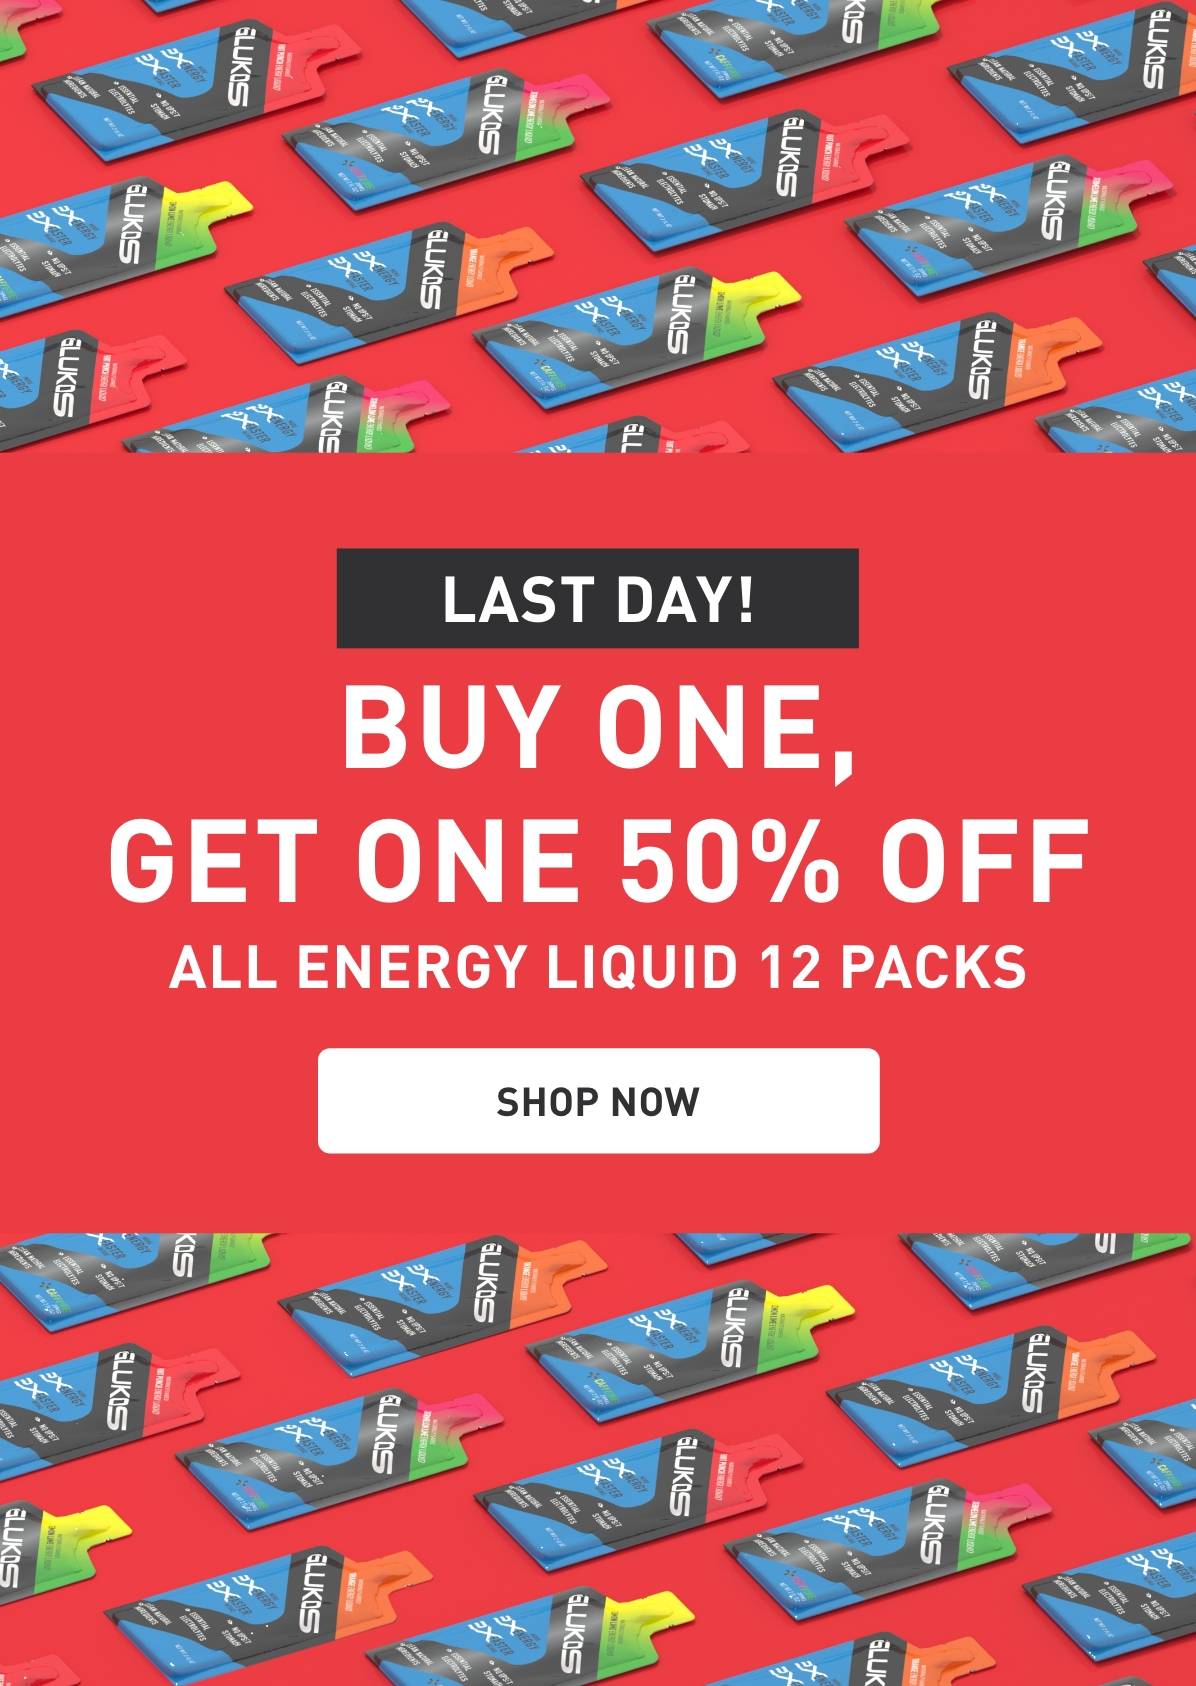 Last Day! Buy One, Get One 50% Off All Energy Liquid 12 Packs SHOP NOW